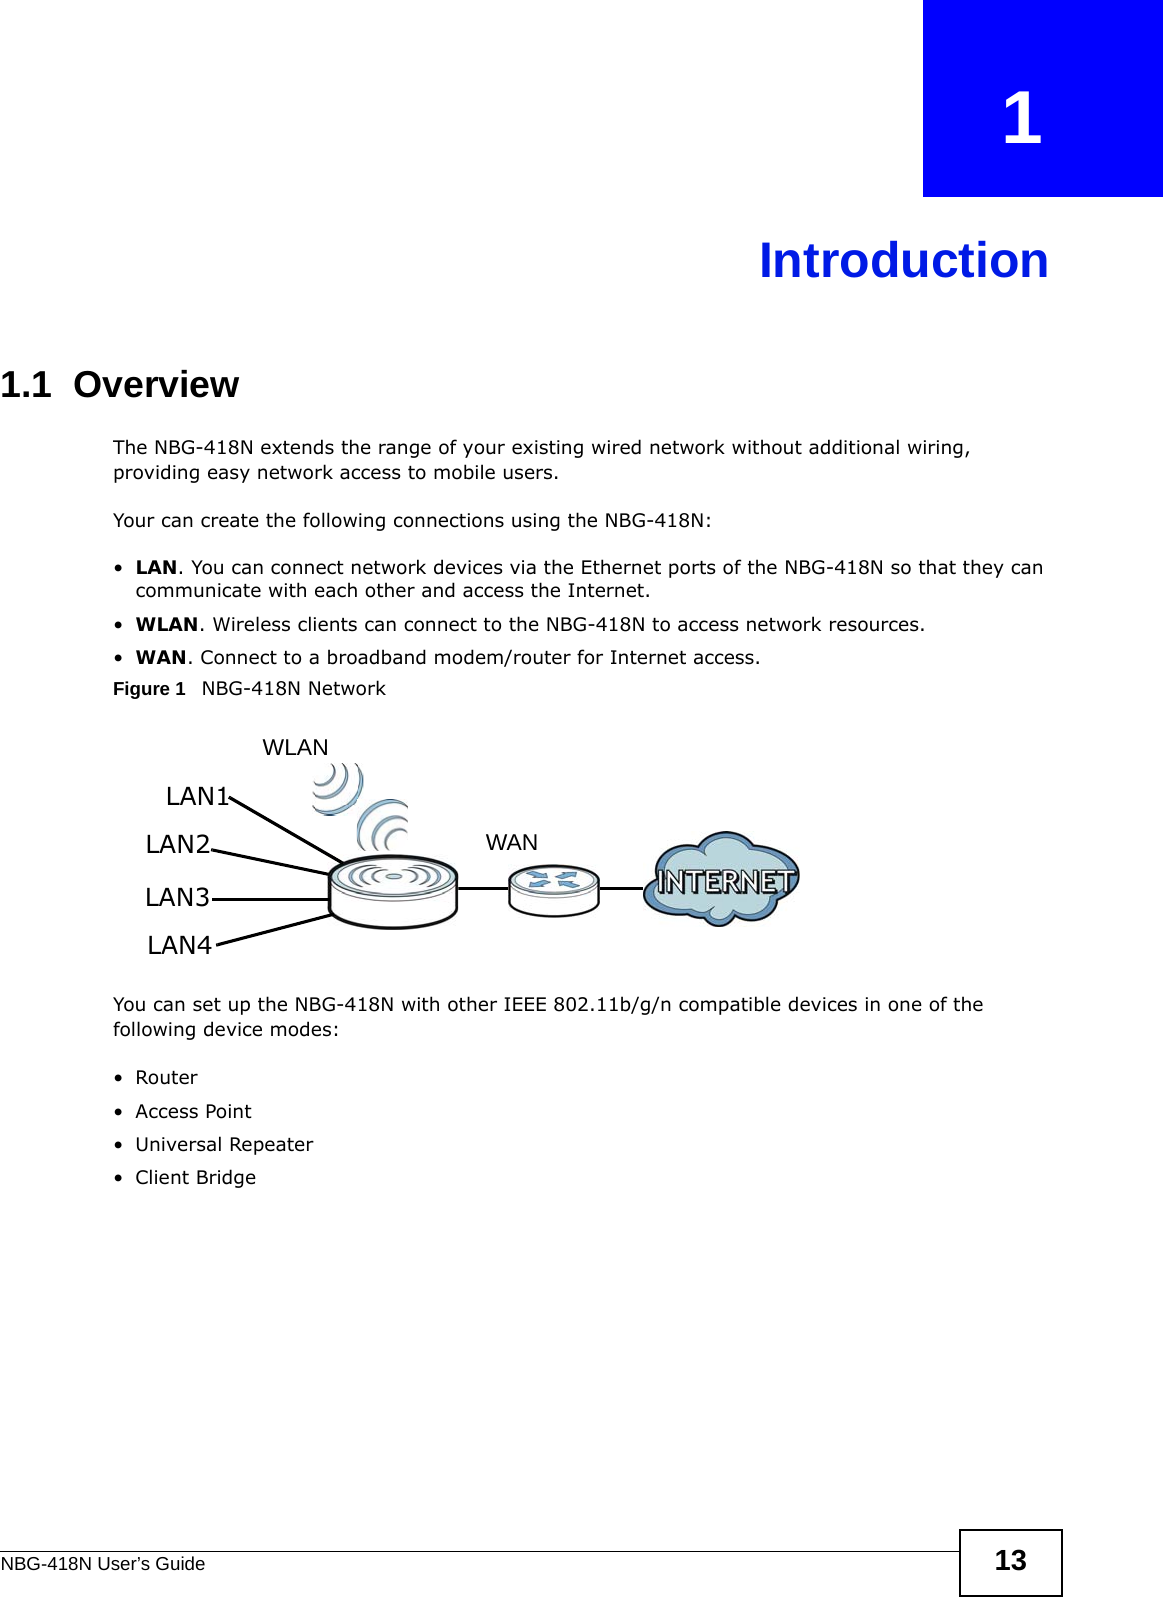 NBG-418N User’s Guide 13CHAPTER   1Introduction1.1  OverviewThe NBG-418N extends the range of your existing wired network without additional wiring, providing easy network access to mobile users. Your can create the following connections using the NBG-418N:•LAN. You can connect network devices via the Ethernet ports of the NBG-418N so that they can communicate with each other and access the Internet.•WLAN. Wireless clients can connect to the NBG-418N to access network resources.•WAN. Connect to a broadband modem/router for Internet access.Figure 1   NBG-418N NetworkYou can set up the NBG-418N with other IEEE 802.11b/g/n compatible devices in one of the following device modes:•Router• Access Point• Universal Repeater• Client BridgeWLANWANLAN1LAN2LAN3LAN4